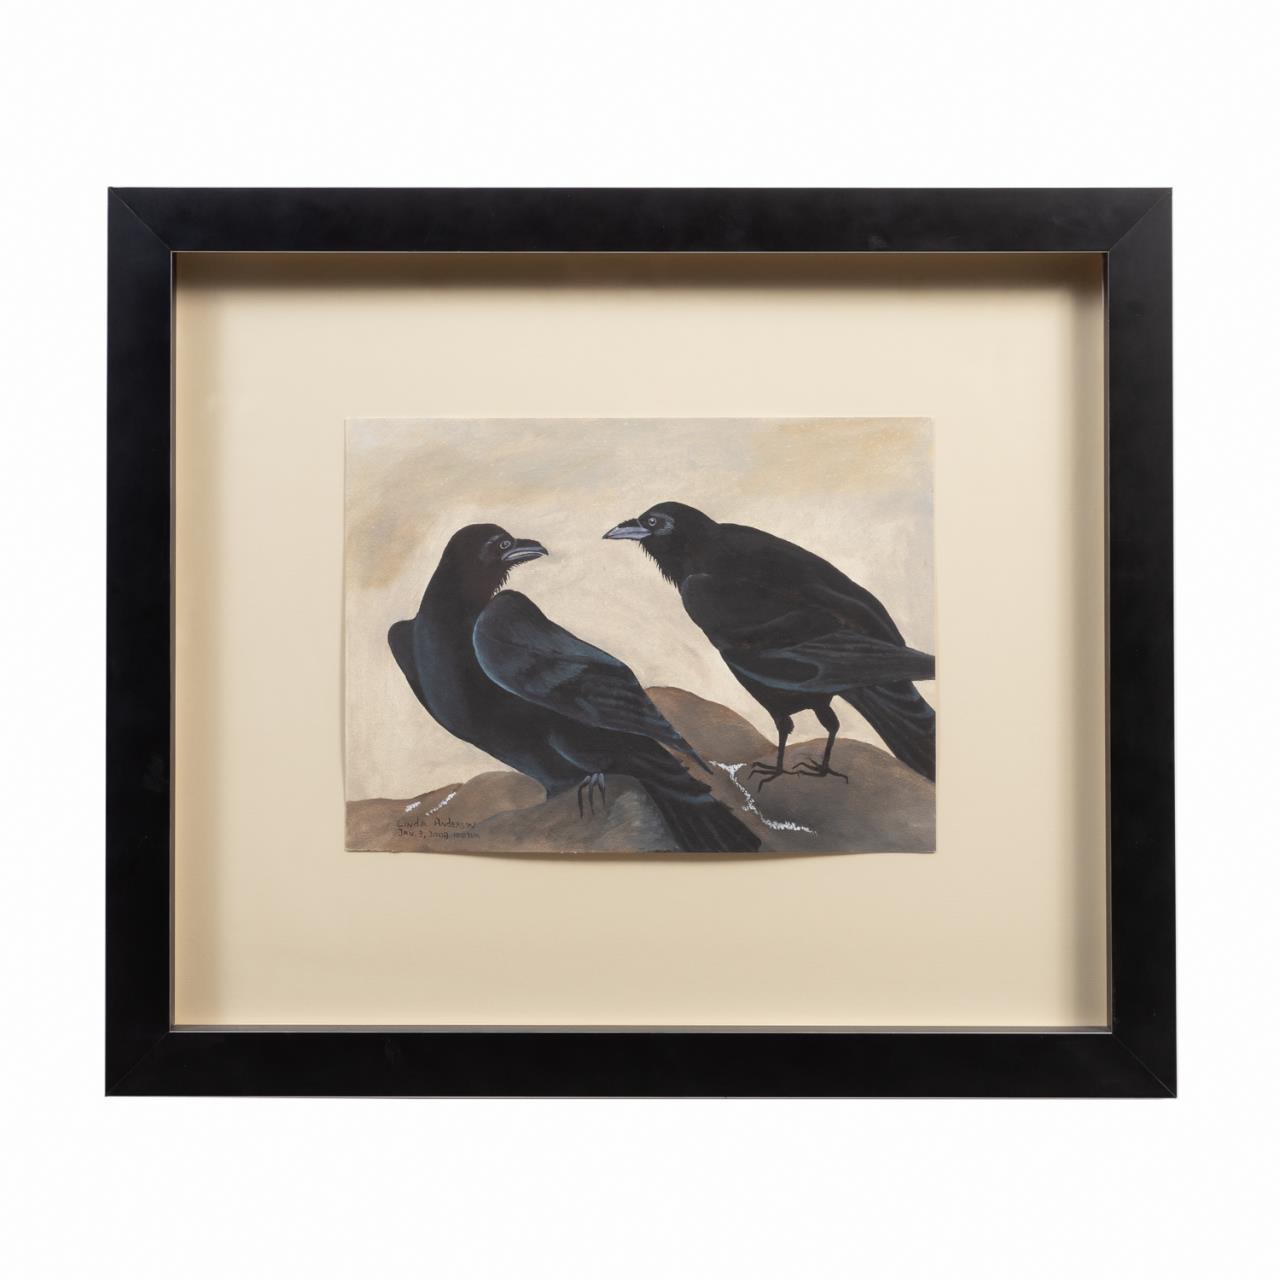 LINDA ANDERSON, TWO CROWS M/M ON PAPER,